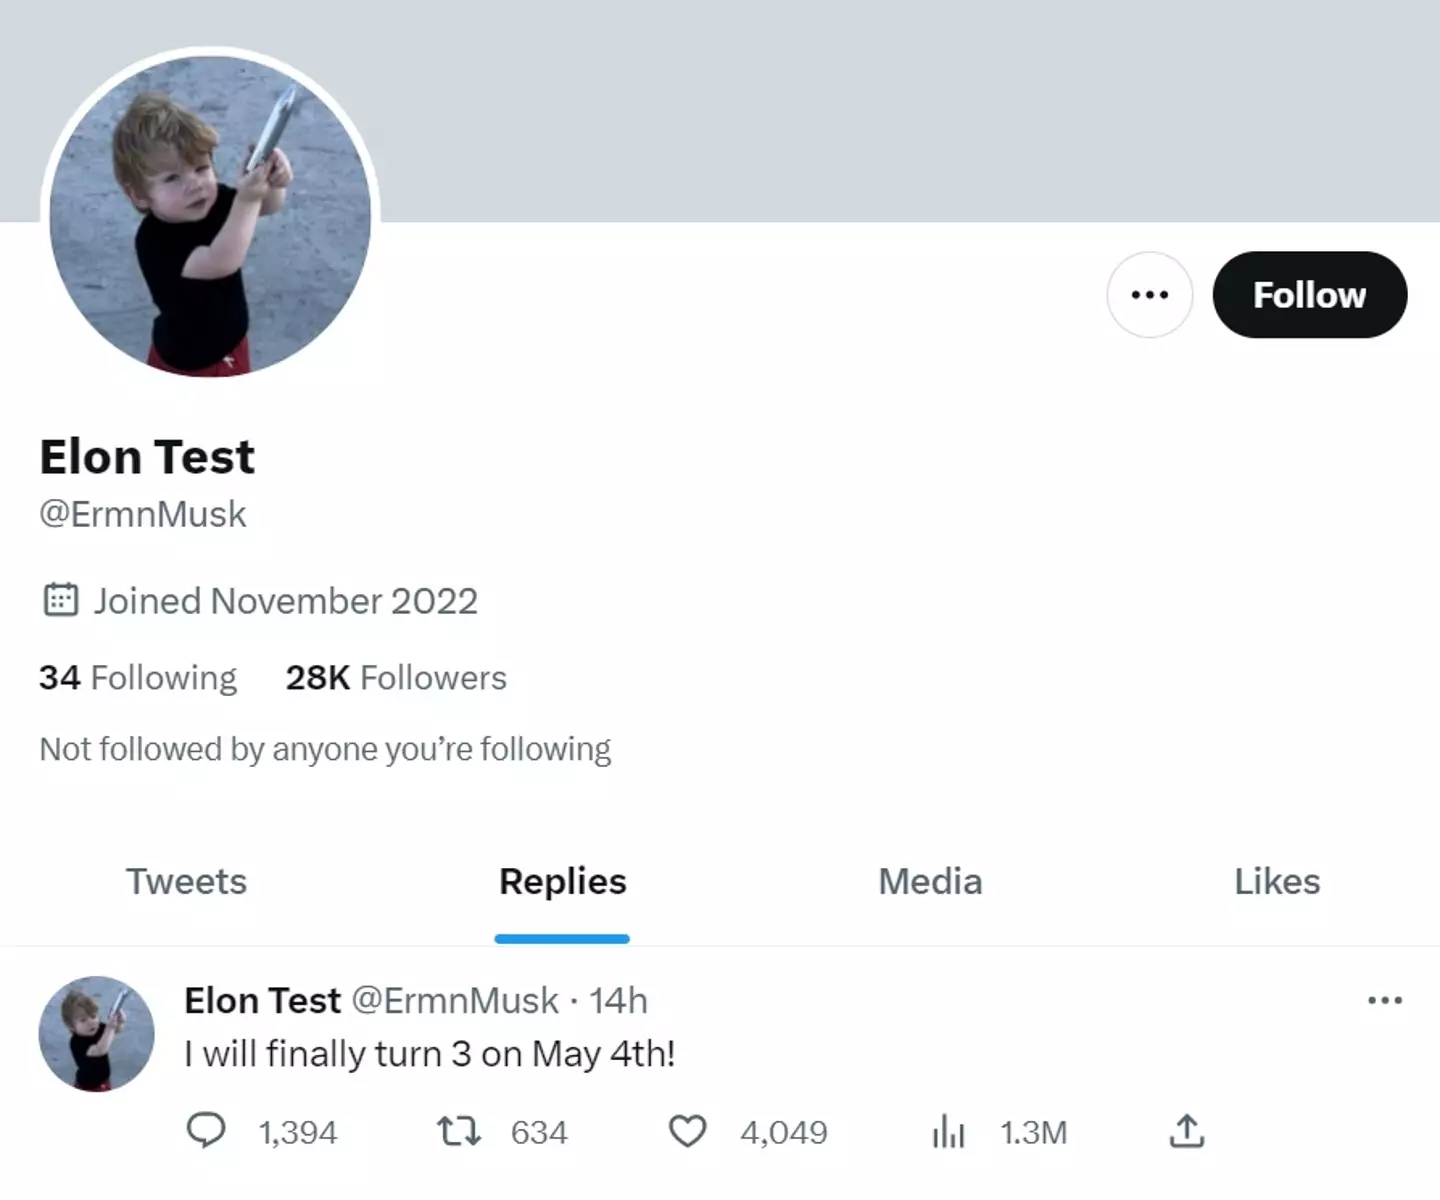 That little picture is the same one as this Twitter account, which according to the stated birthday would be for X AE A-XII, Musk's child with Grimes.